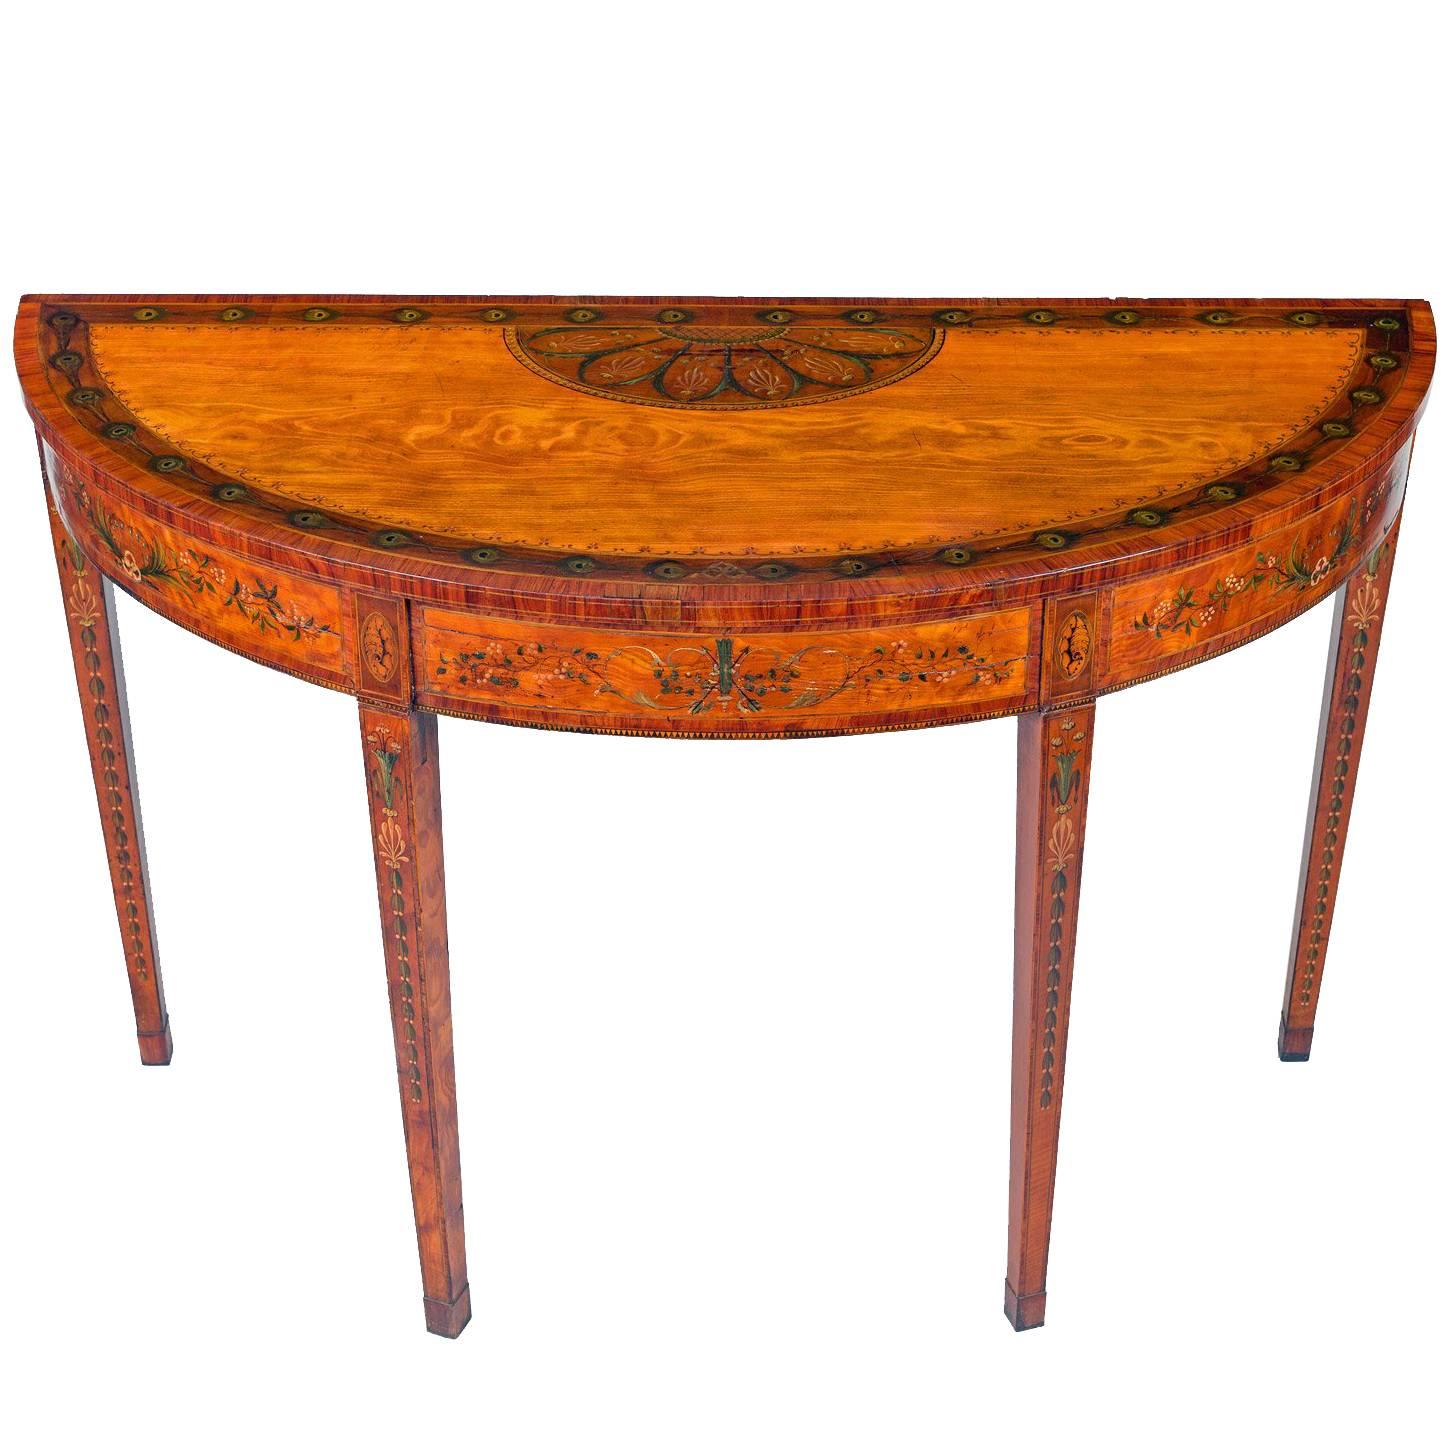 Superb George III Inlaid Satinwood Demi-Lune Console Table